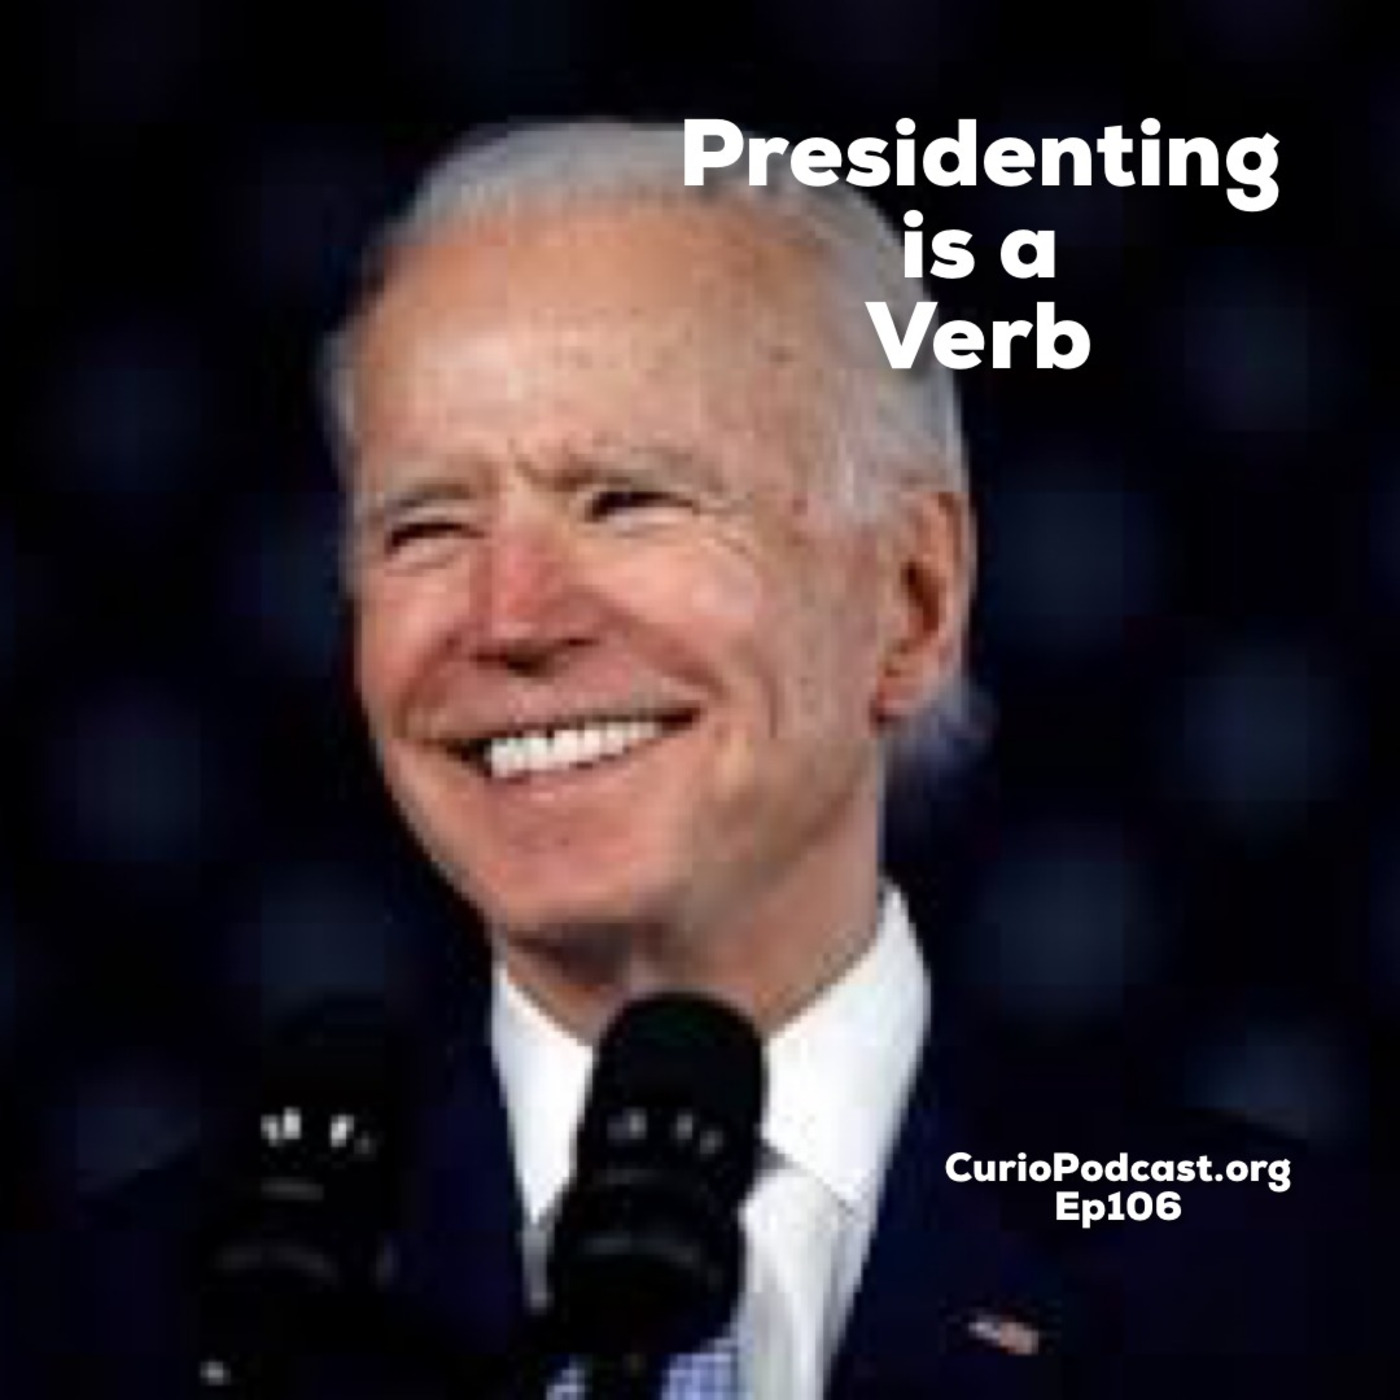 Presidenting is a Verb